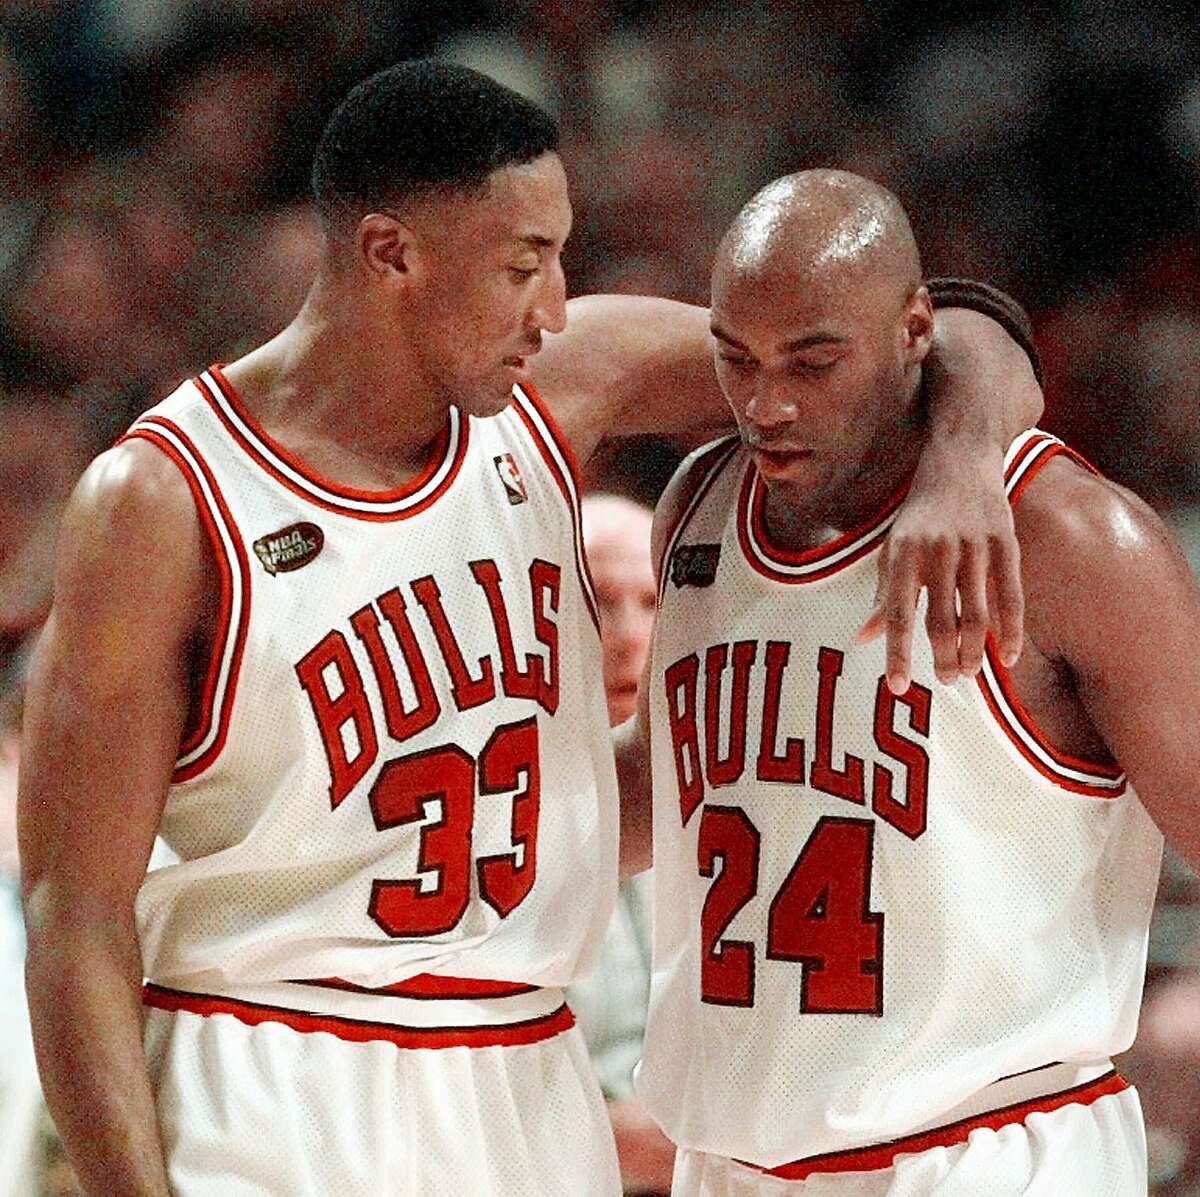 Chicago Bulls' Scottie Pippen (33) speaks with teammate Scott Burrell during the second half of the Bulls' 96-54 blowout of the Utah Jazz in Game 3 of the NBA Finals Sunday, June 7, 1998, in Chicago. (AP Photo/Michael S. Green)